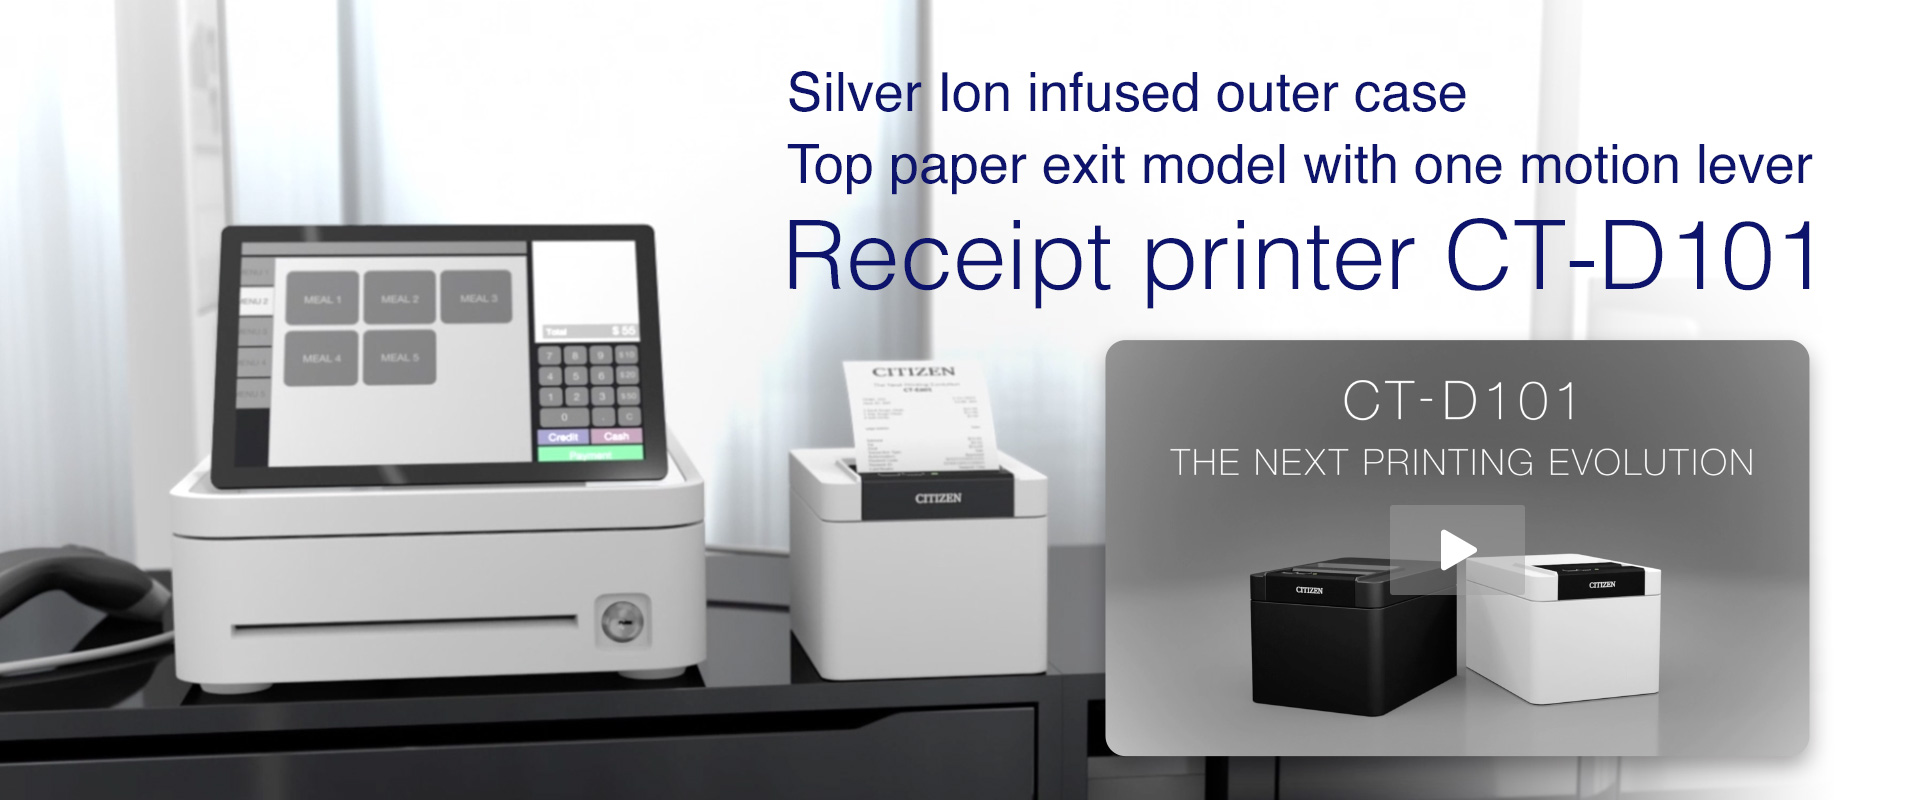 Silver Ion infused outer case, Top paper exit model with one motion lever. Receipt printer CT-D101